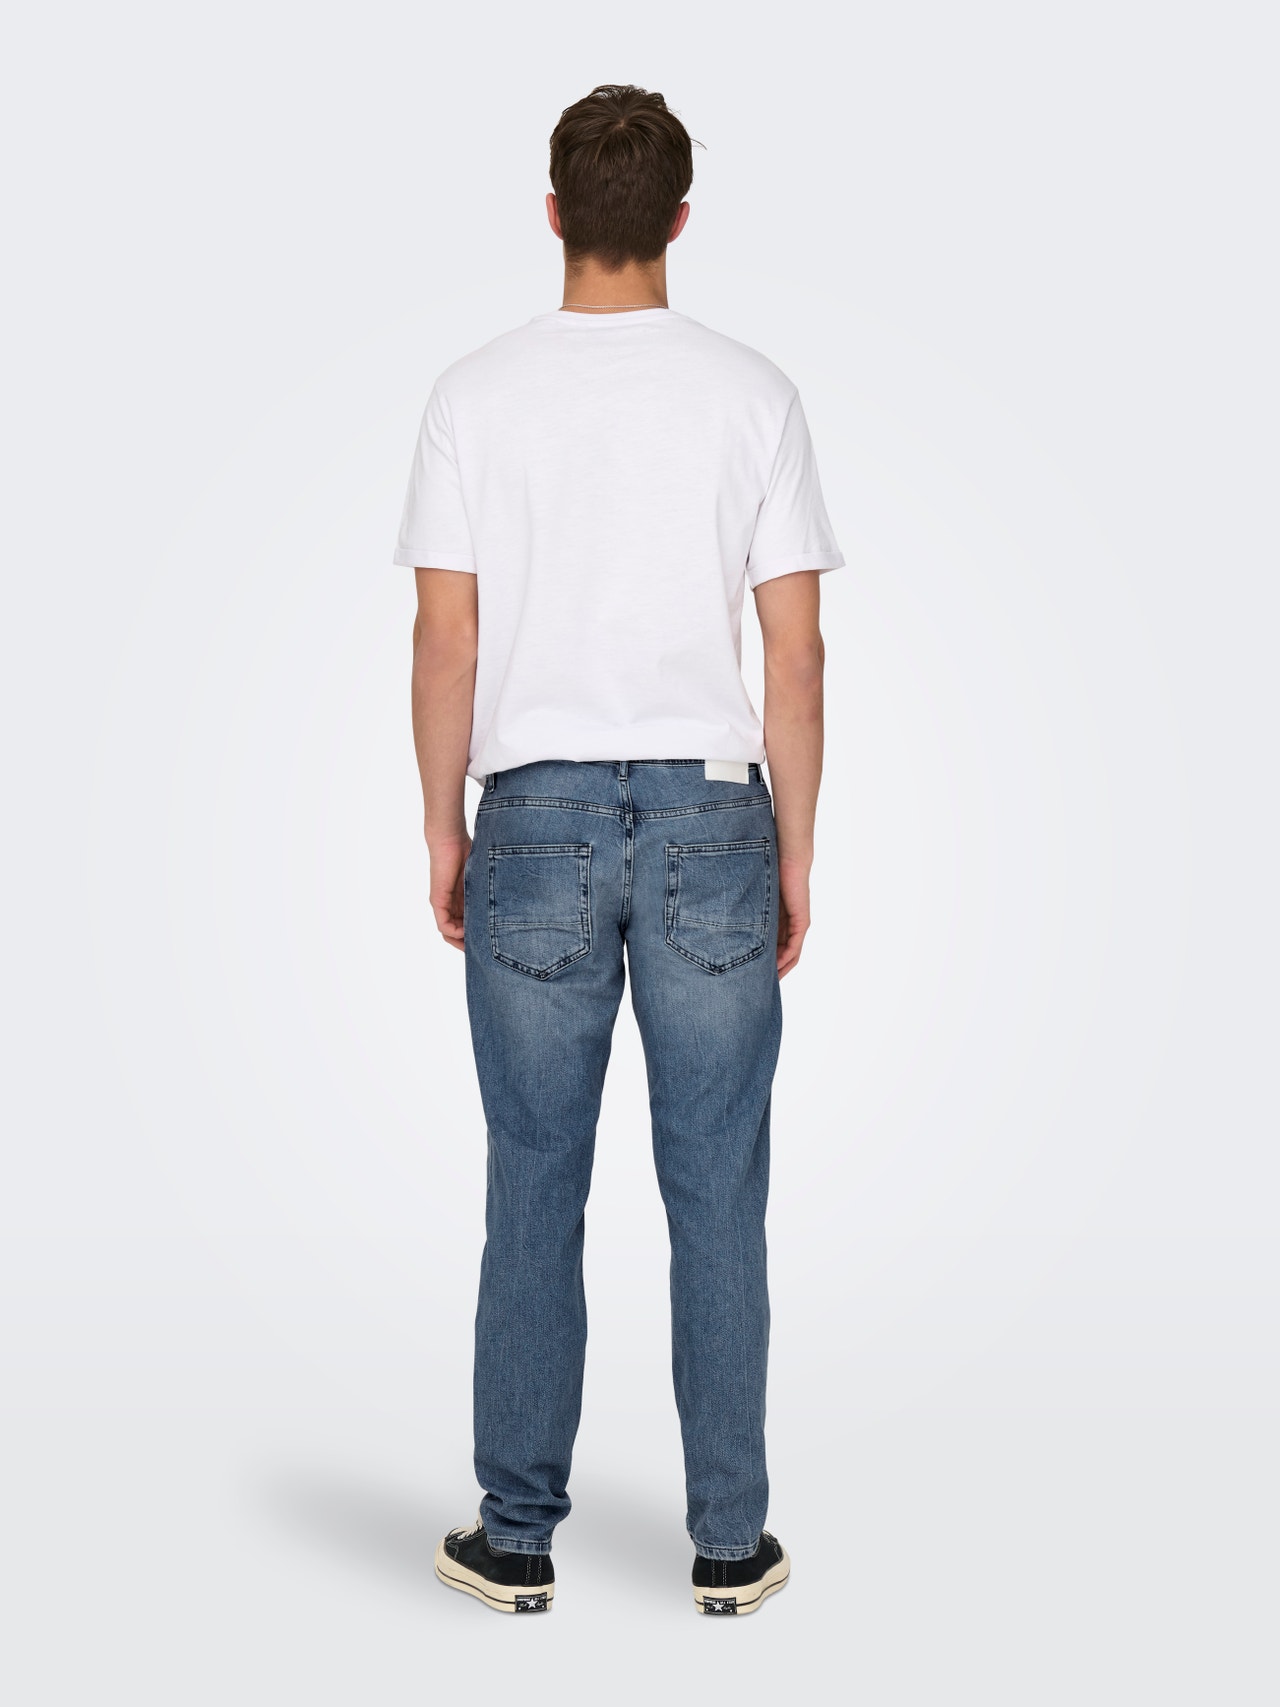 ONLY & SONS Tapered Fit Jeans -Blue Denim - 22023024